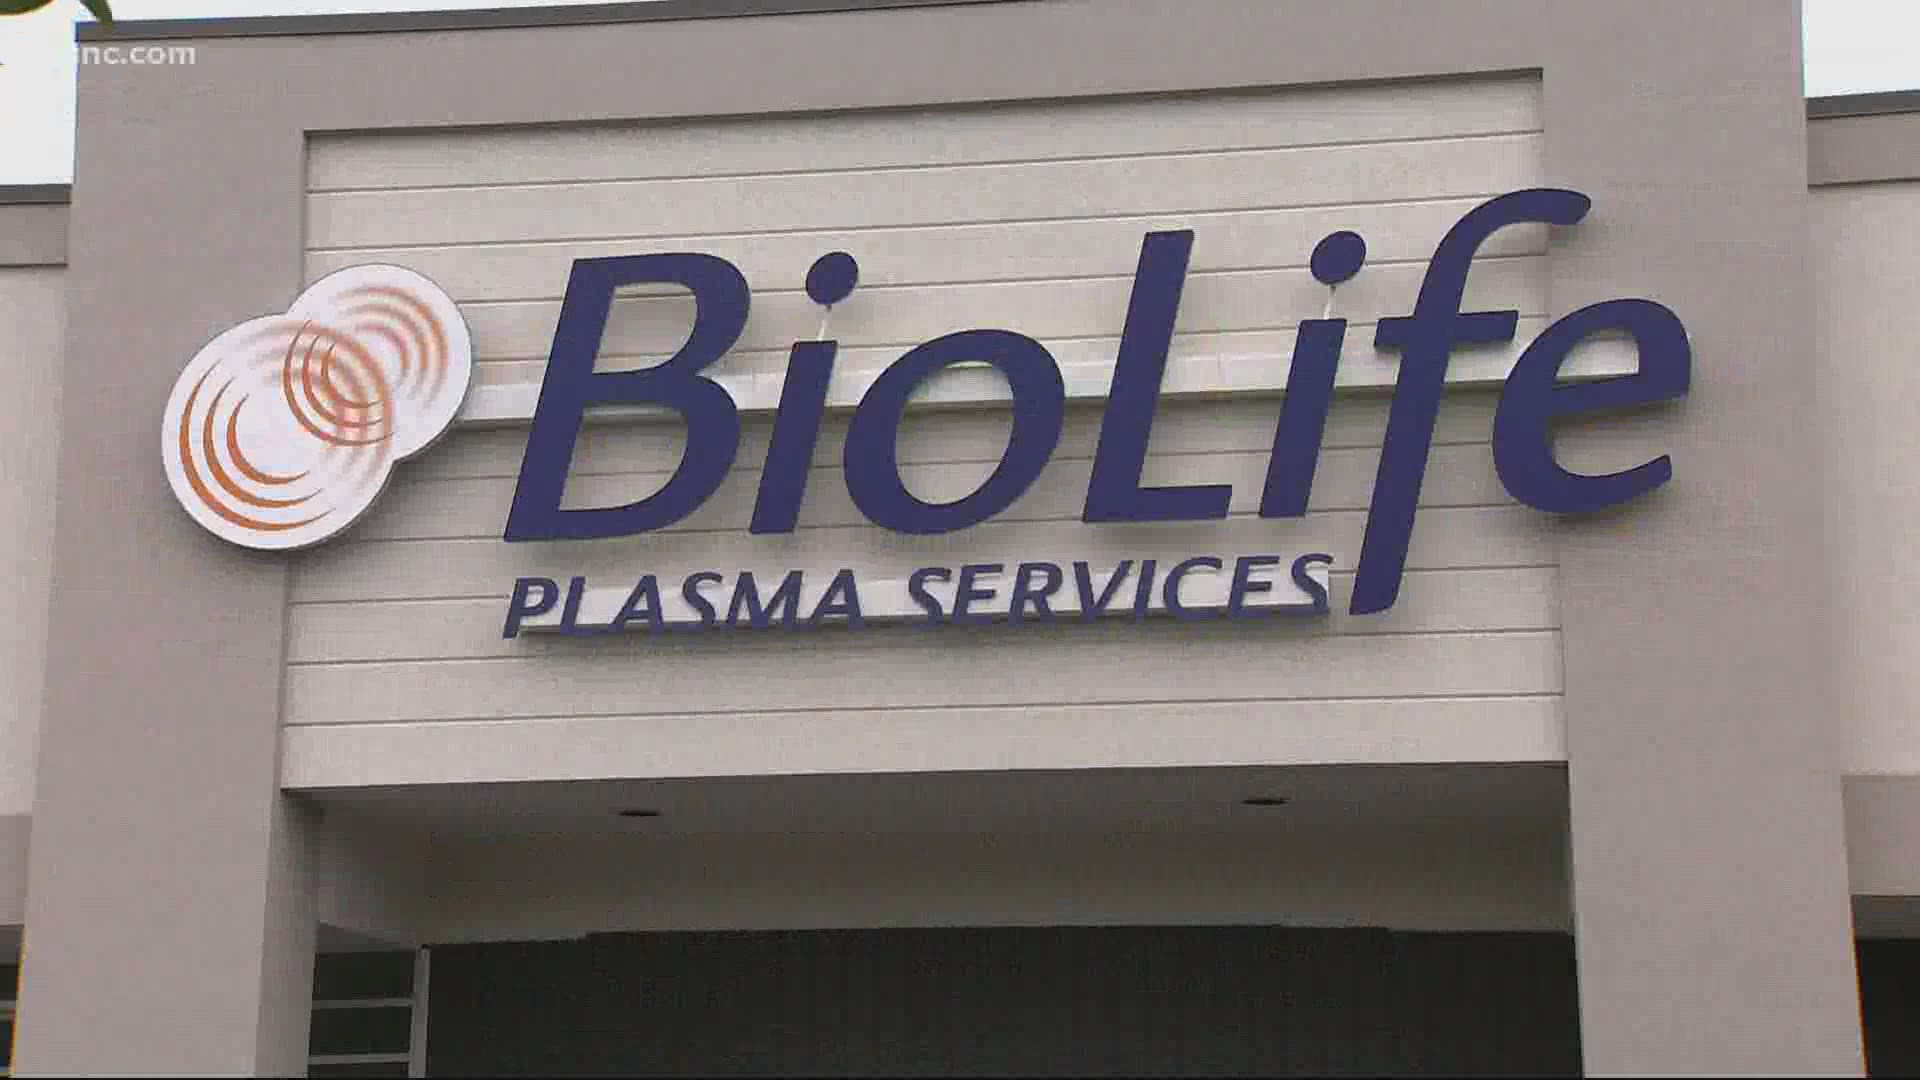 For the first time, WCNC Charlotte is hearing from a Charlotte woman who donated plasma, after recovering from the virus.